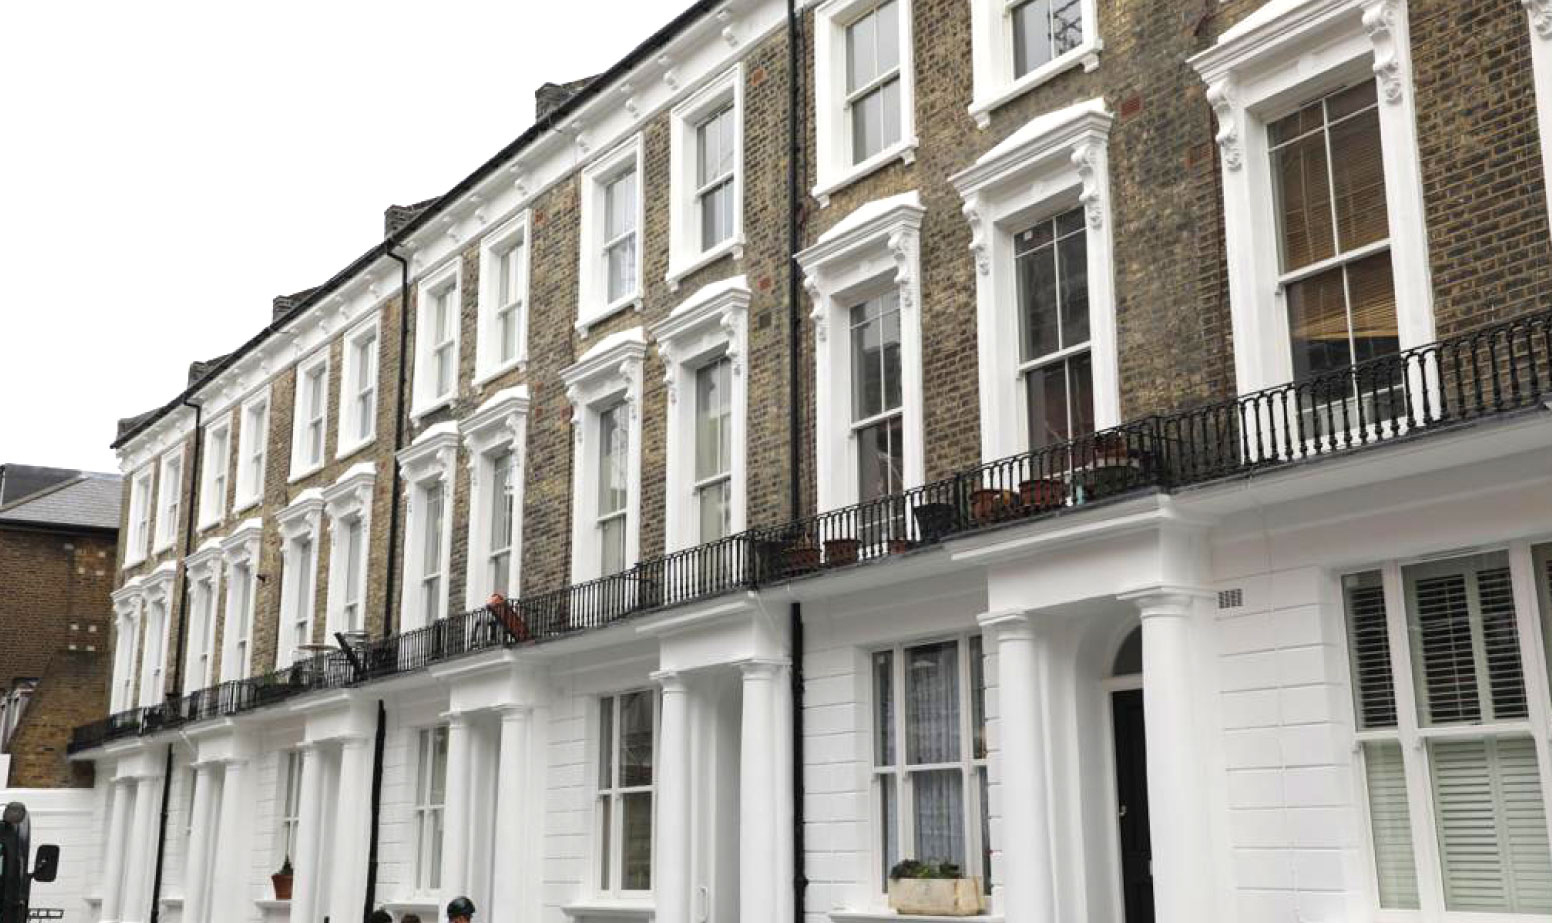 New £1.2bn Assets and Building Safety Framework for Notting Hill Genesis